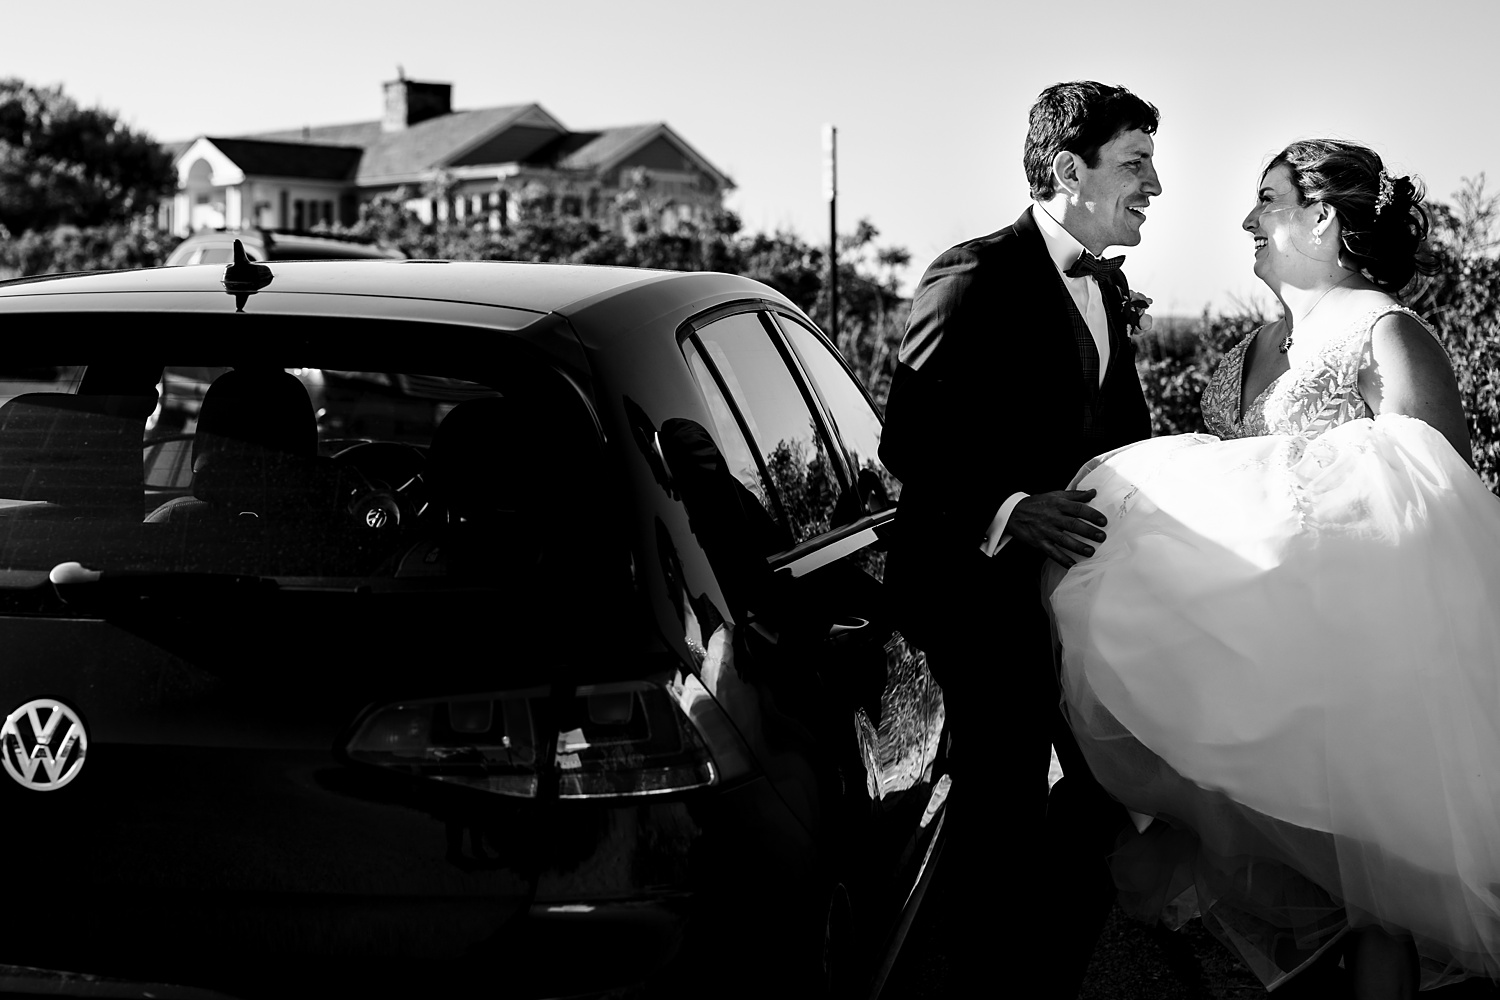 Bride and groom smile as he helps her get into the car on their wedding day